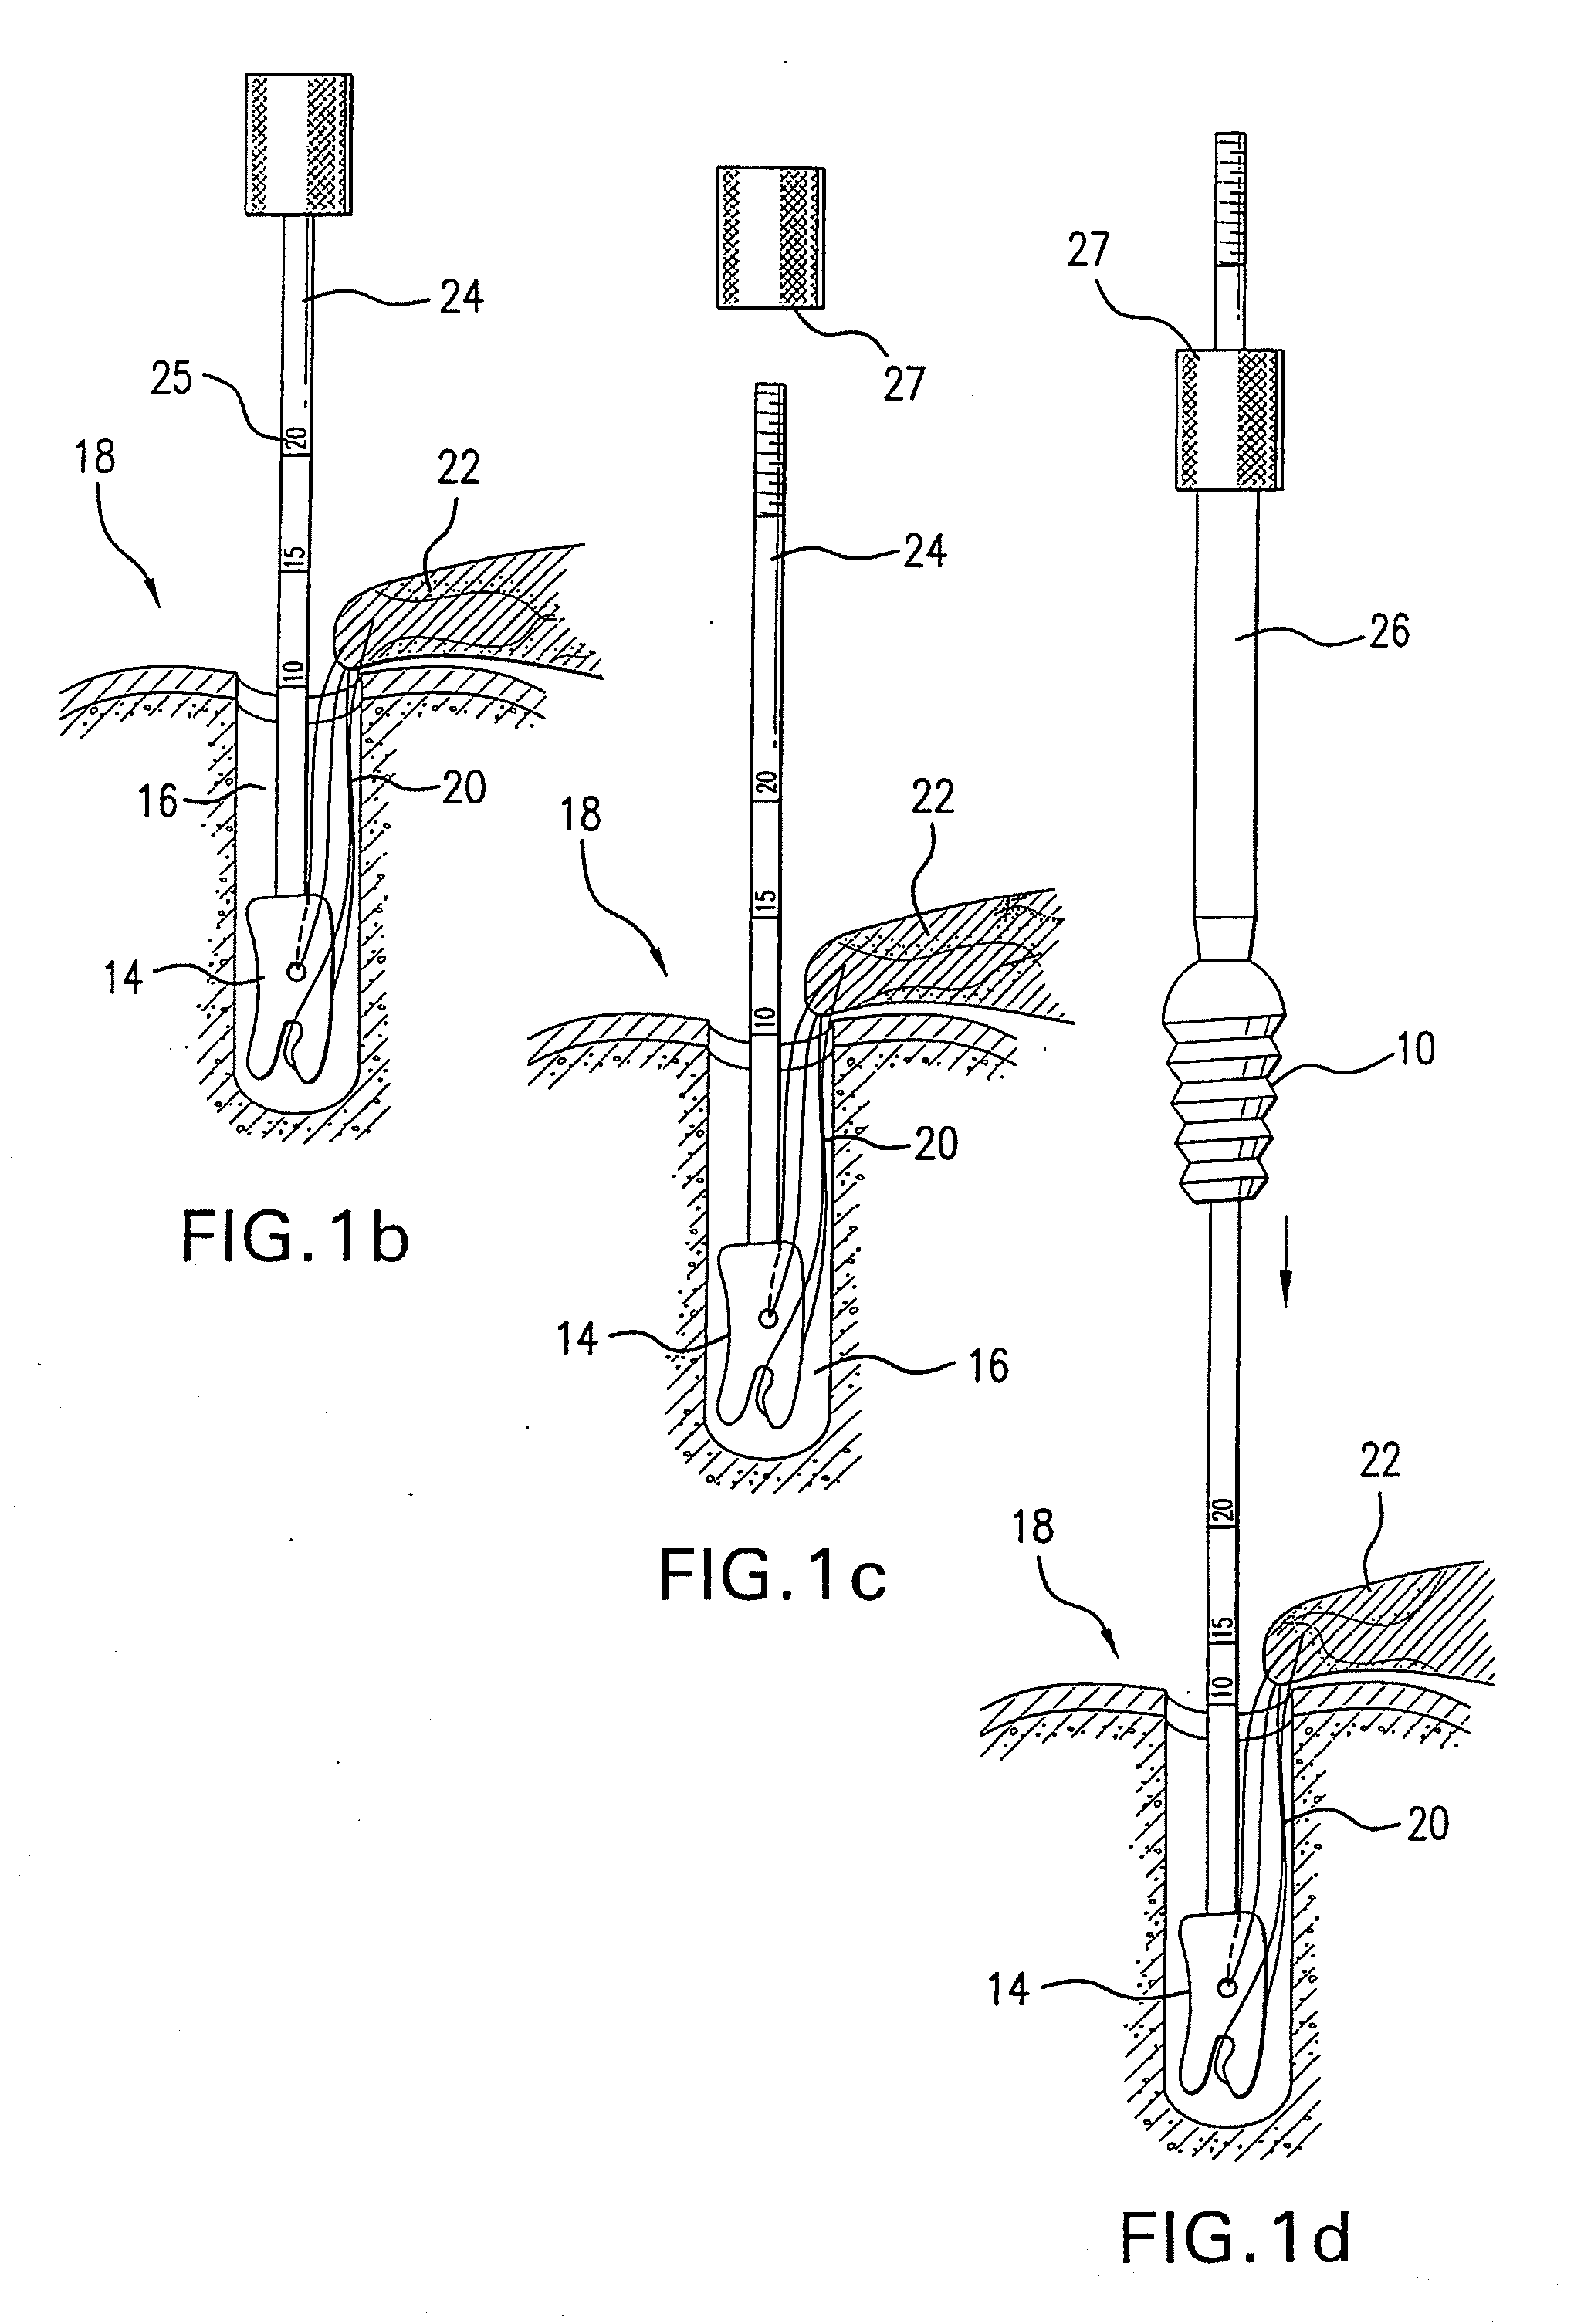 Method for securing sutures to bones